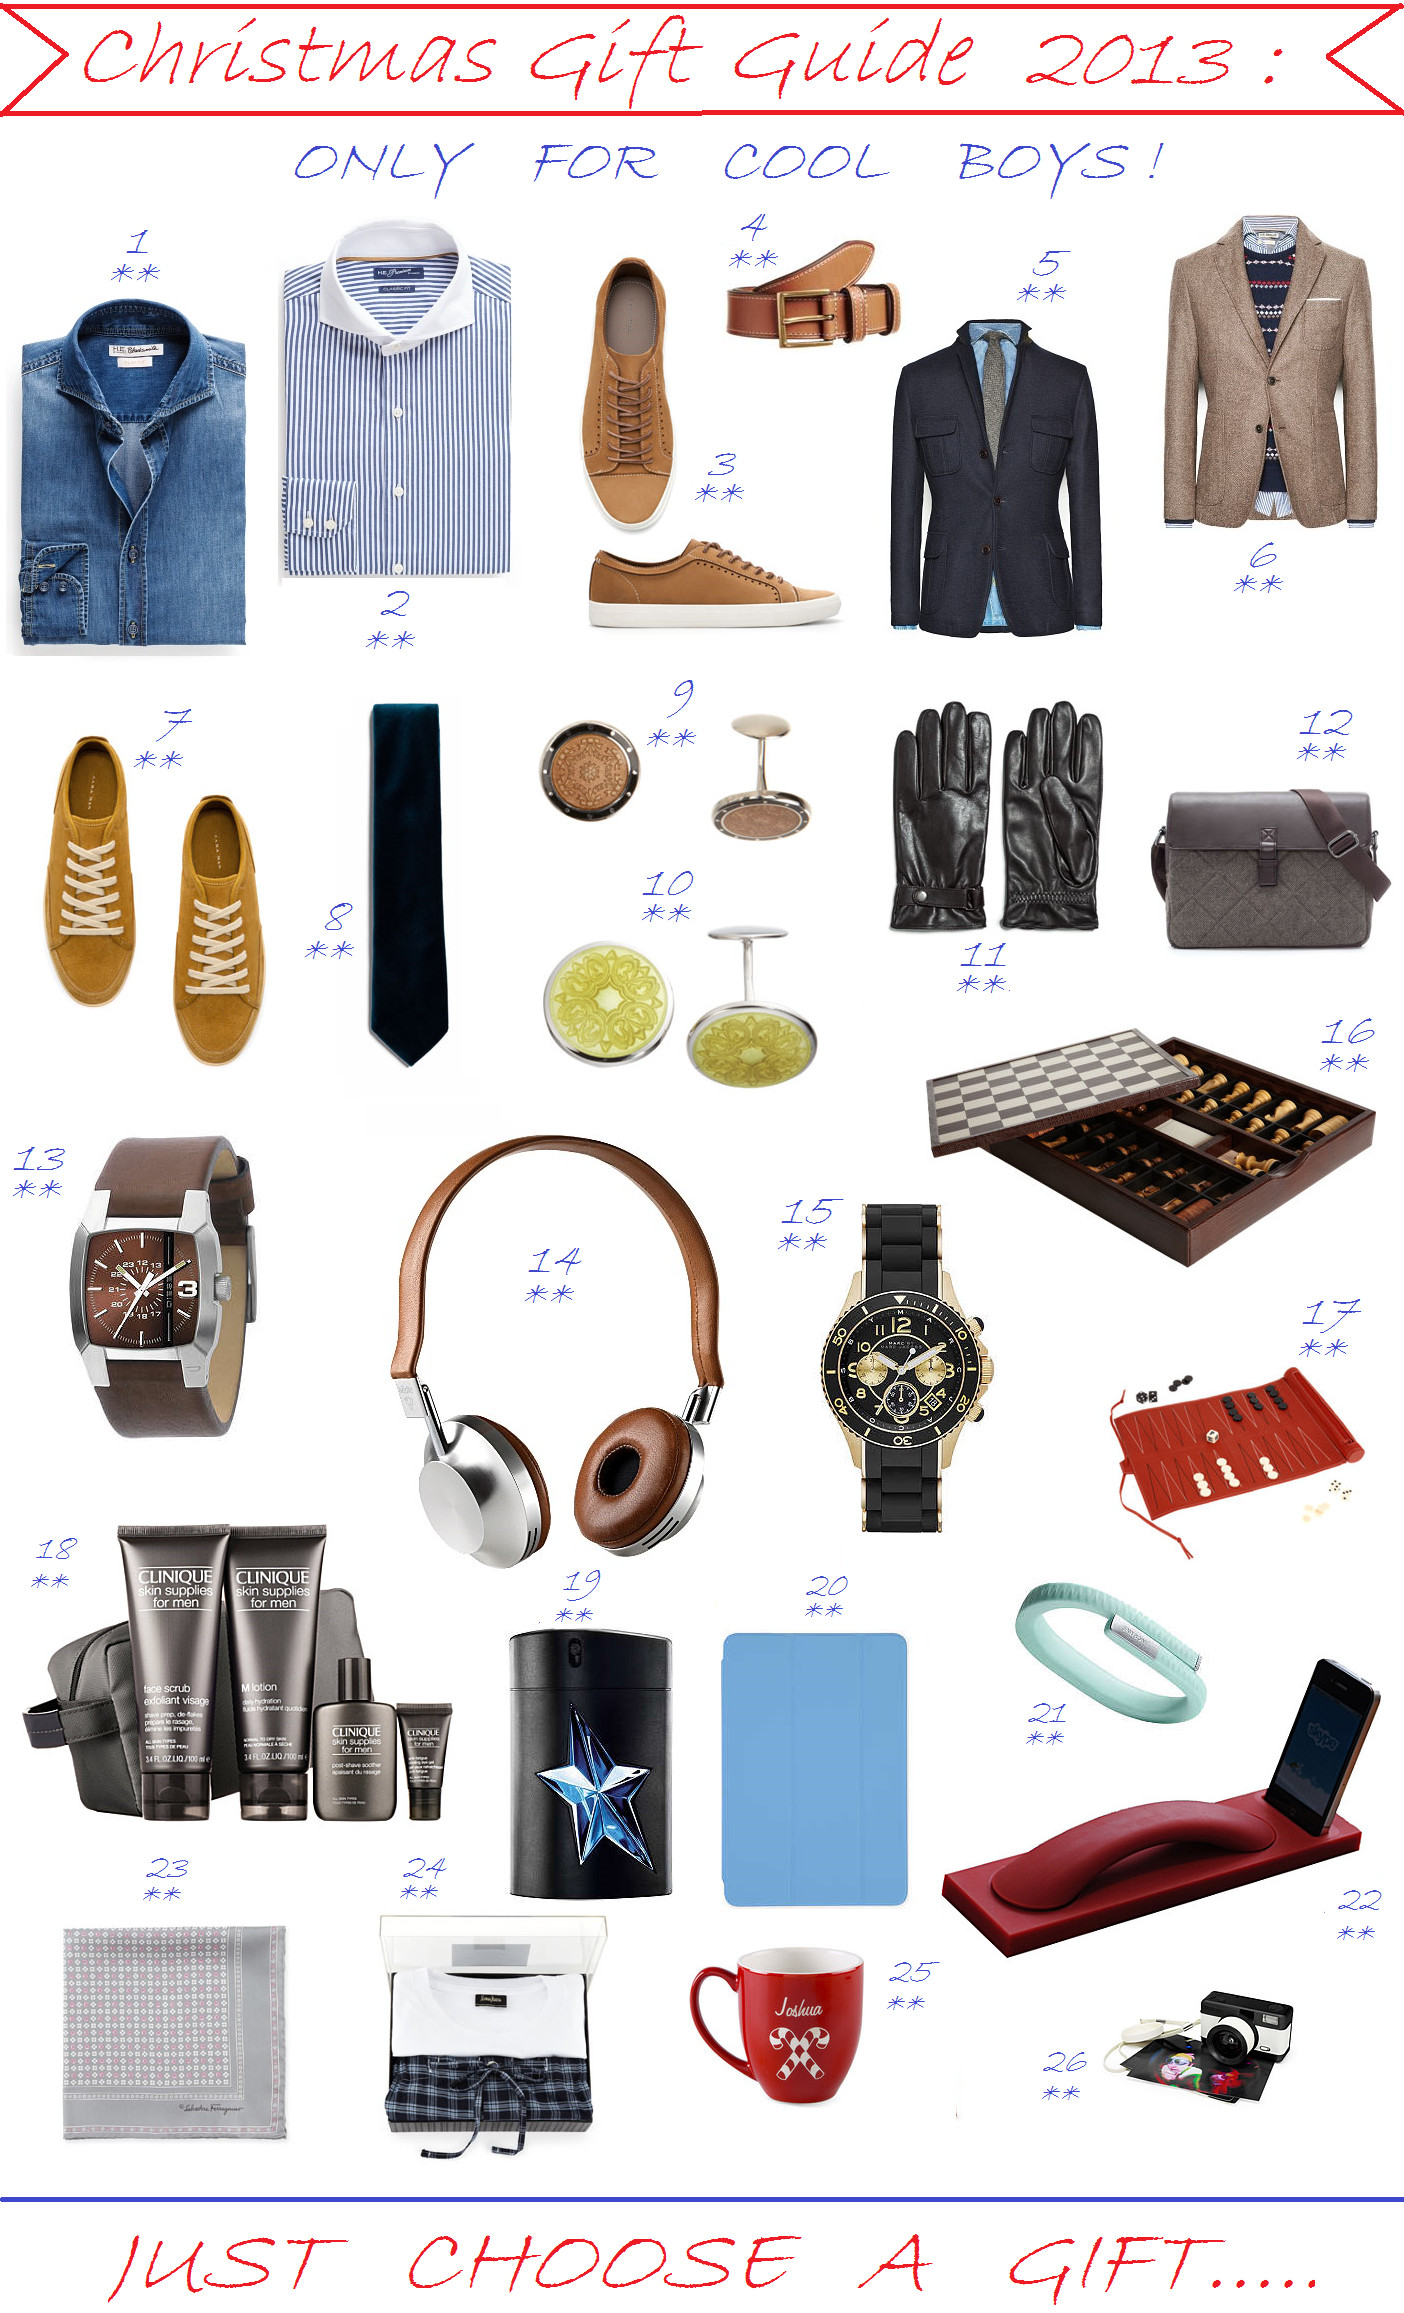 Small Gift Ideas For Boys
 CHRISTMAS GIFT GUIDE 2013 ONLY FOR COOL BOYS